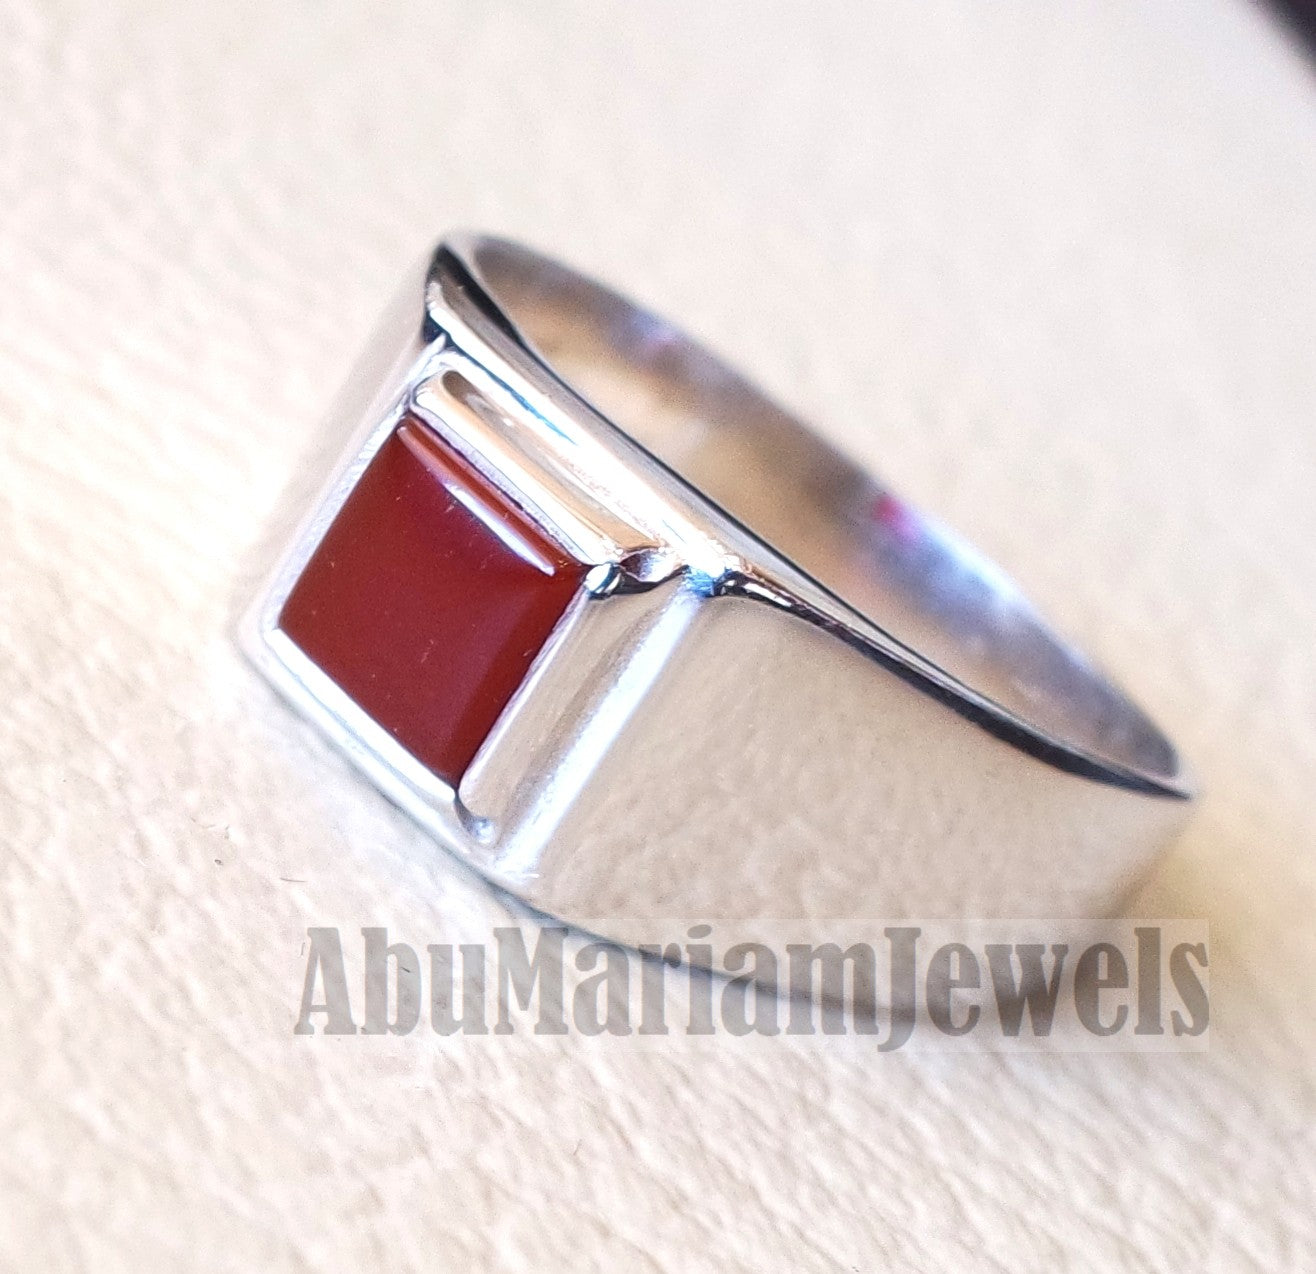 square small pinkie natural red aqeeq carnelian agate stone sterling silver 925 simple man ring jewelry any size fast shipping